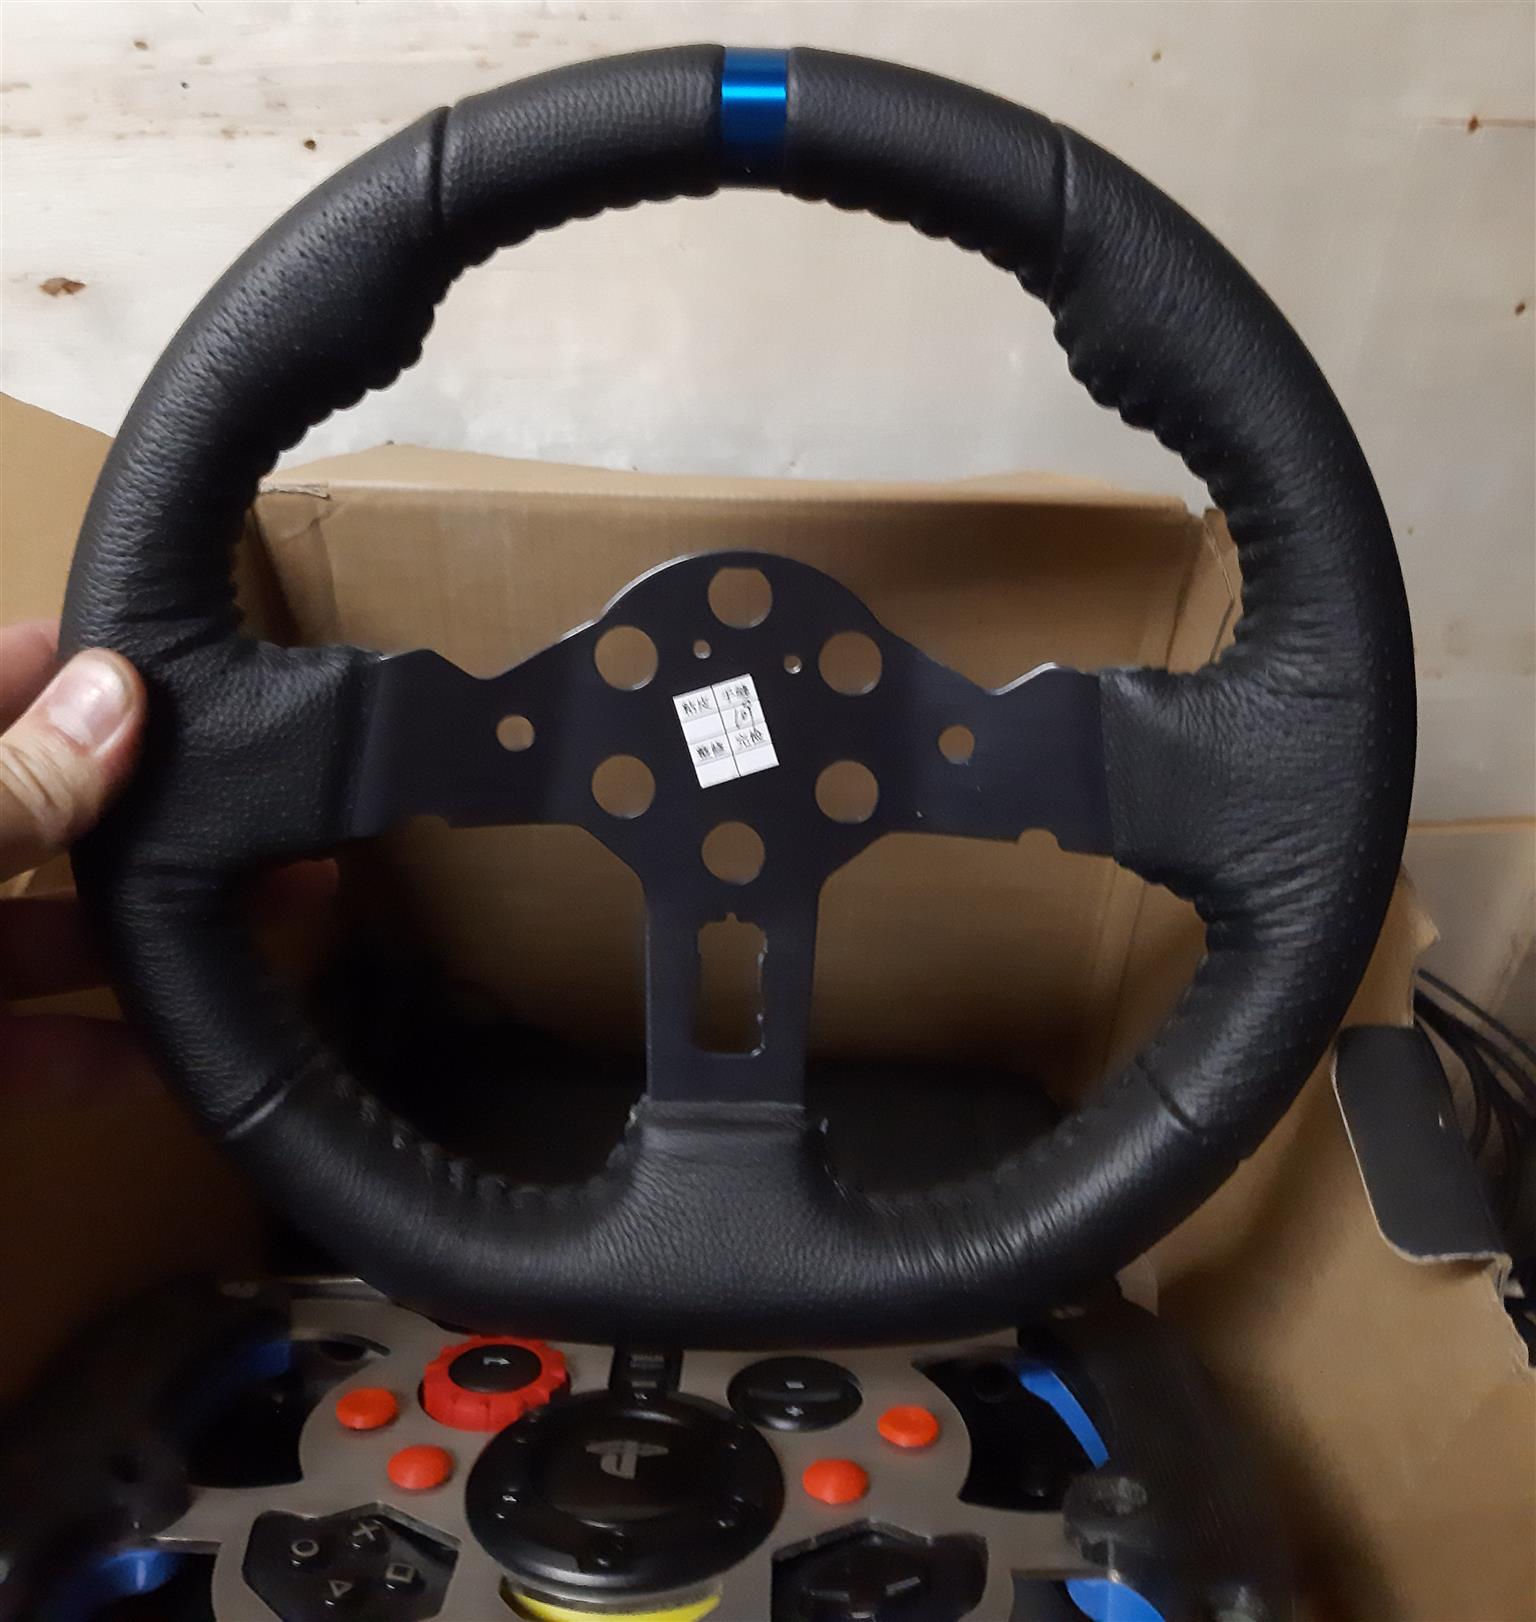 LOGITECH G29 steering wheel with pedals, gear shifter, and accessories